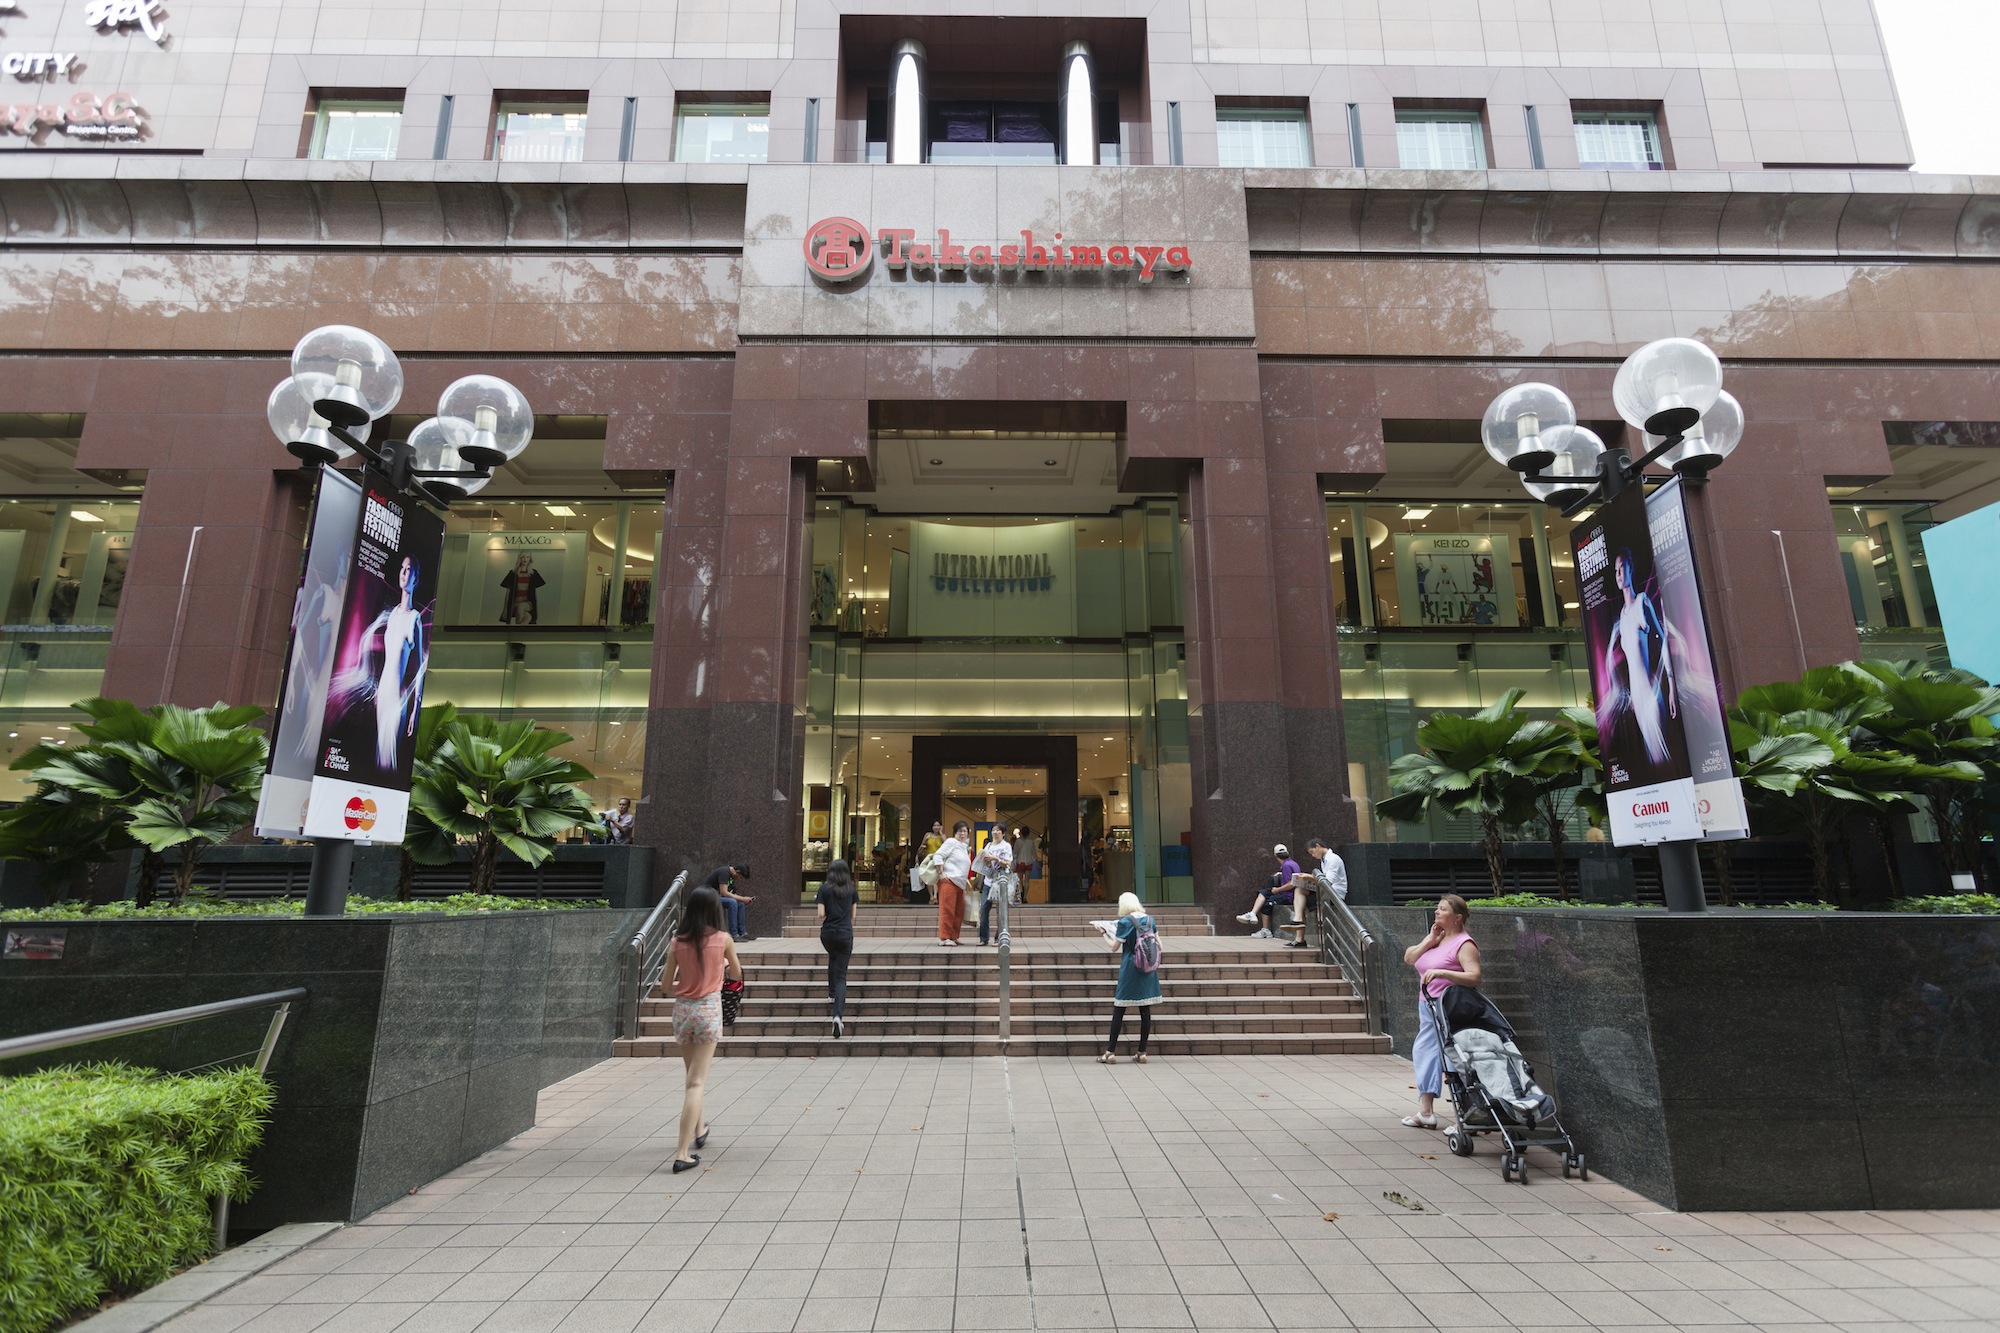 Takashimaya department store is seen in Orchard Road, Singapore’s prime shopping district. Vacancies in the area have risen, and property brokers are expecting more retailers to scale back. | ISTOCK